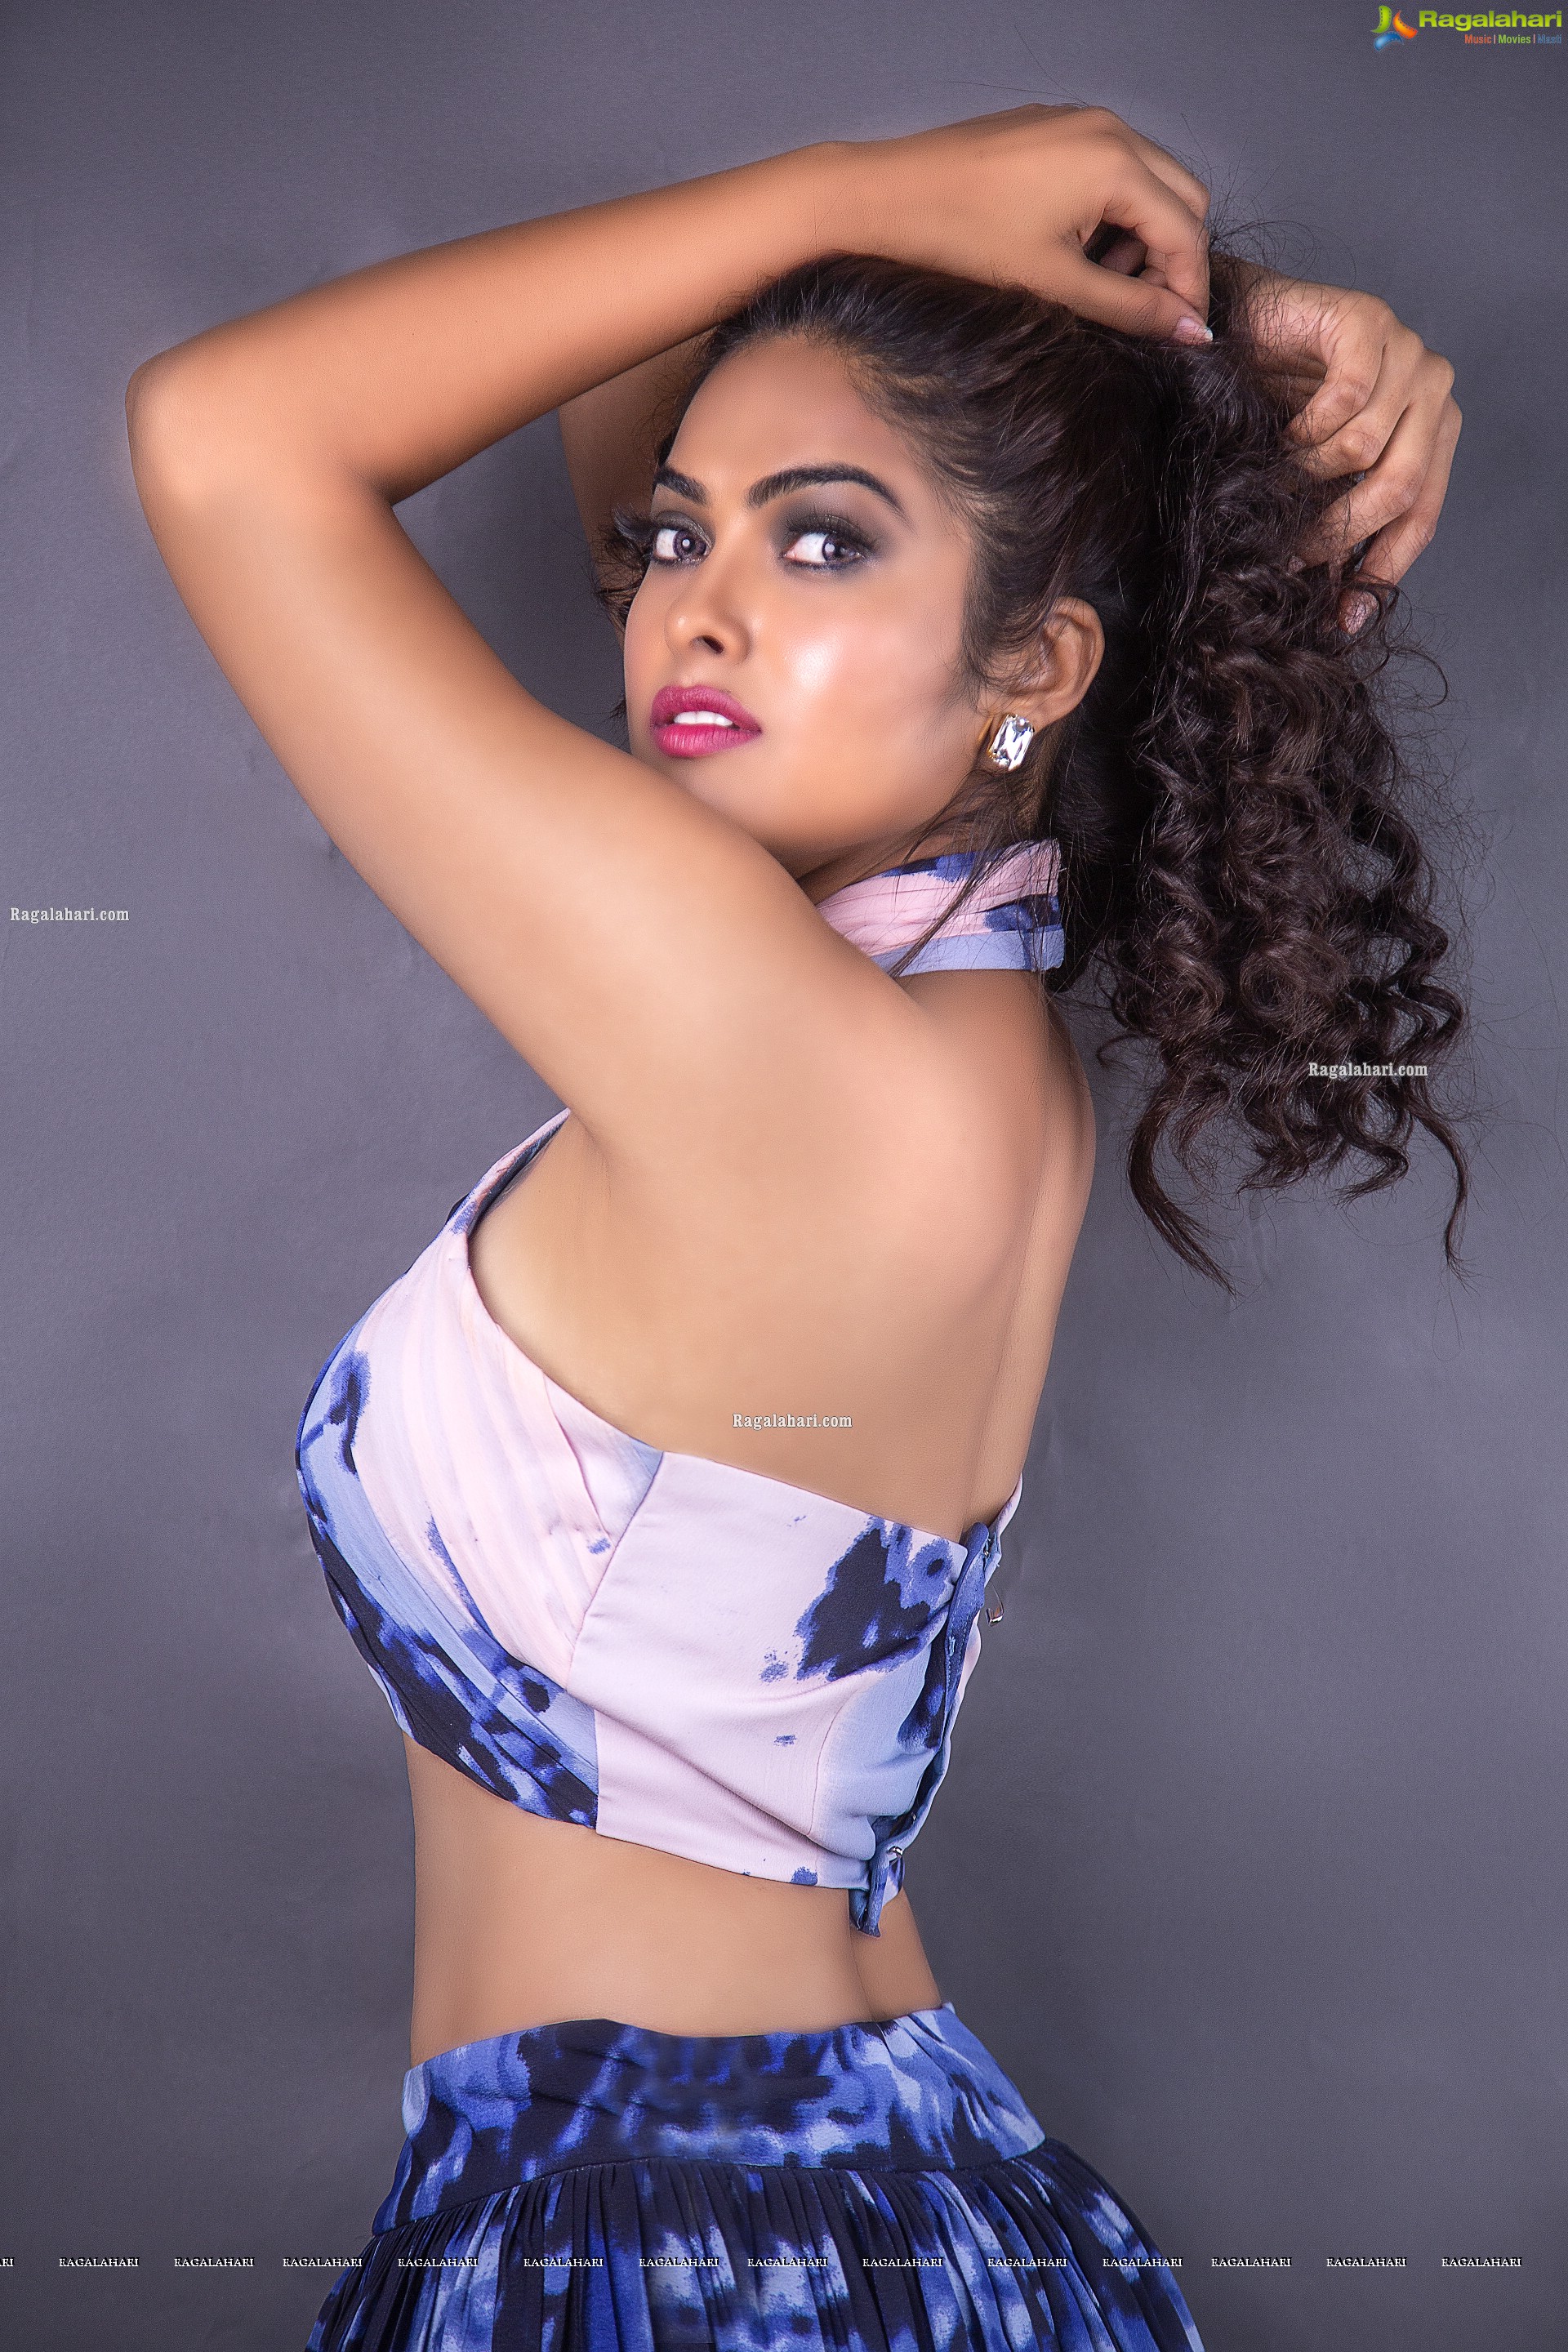 Divi Vadthya displayed oodles of glamour, HD Photo Gallery